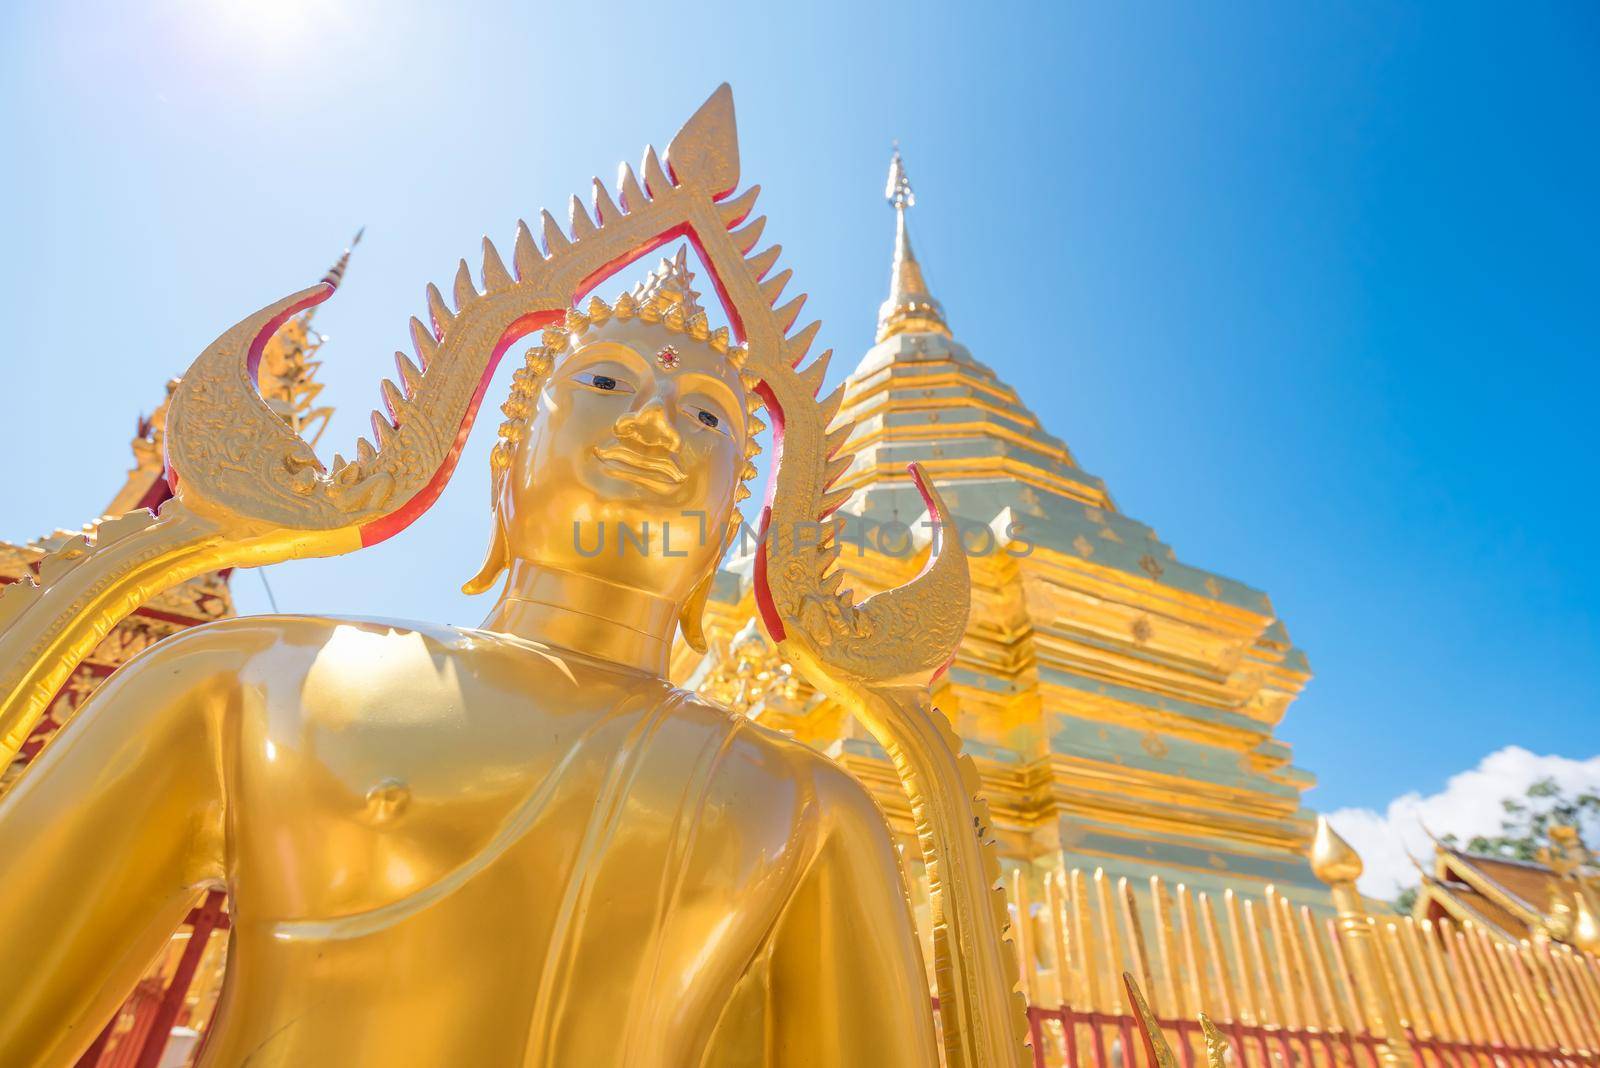 Buddha statue at Wat Phra That Doi Suthep with blue sky in Chiang Mai. The attractive sightseeing place for tourists and landmark of Chiang Mai,Thailand. by Nuamfolio